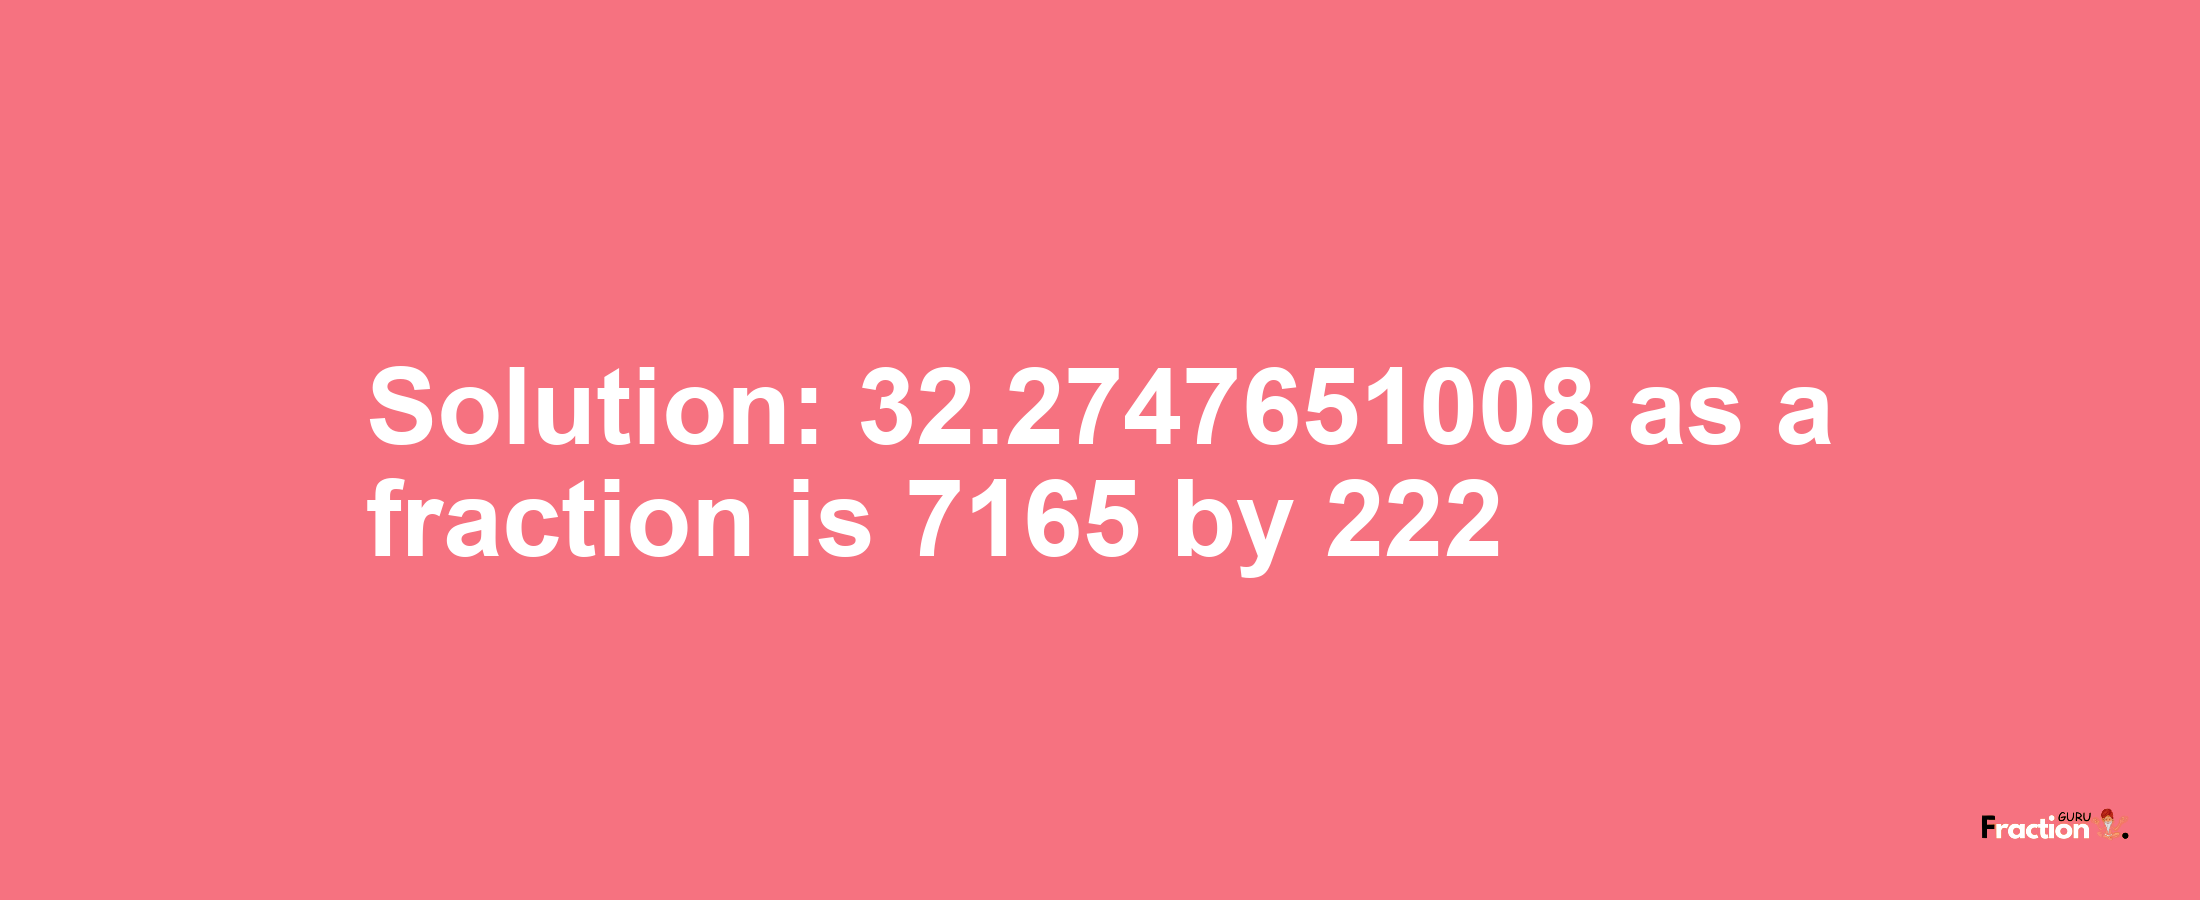 Solution:32.2747651008 as a fraction is 7165/222